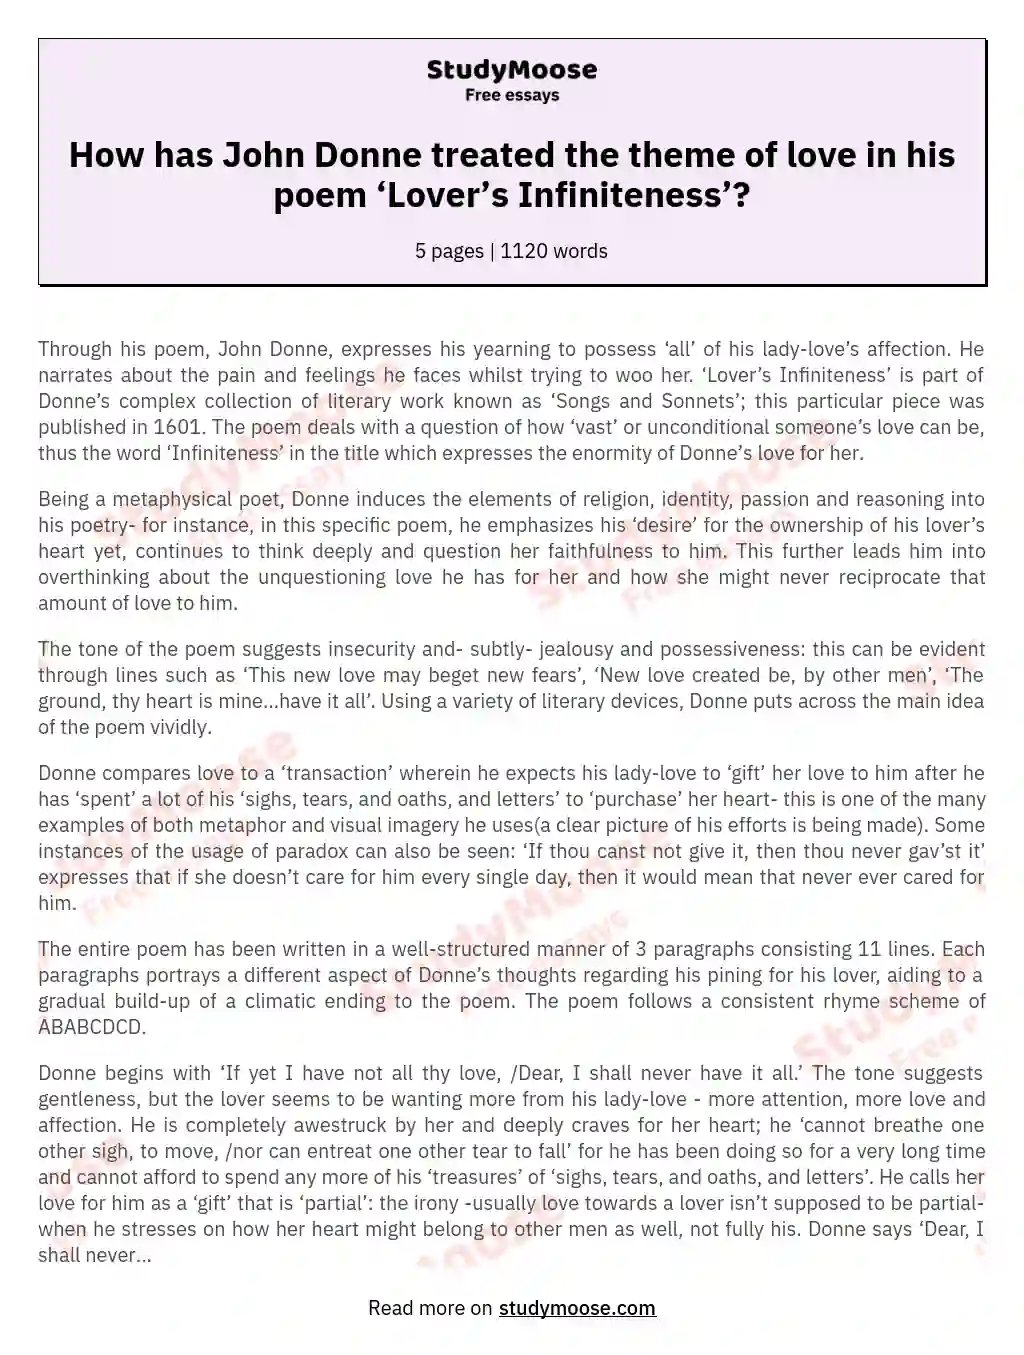 How has John Donne treated the theme of love in his poem ‘Lover’s Infiniteness’? essay